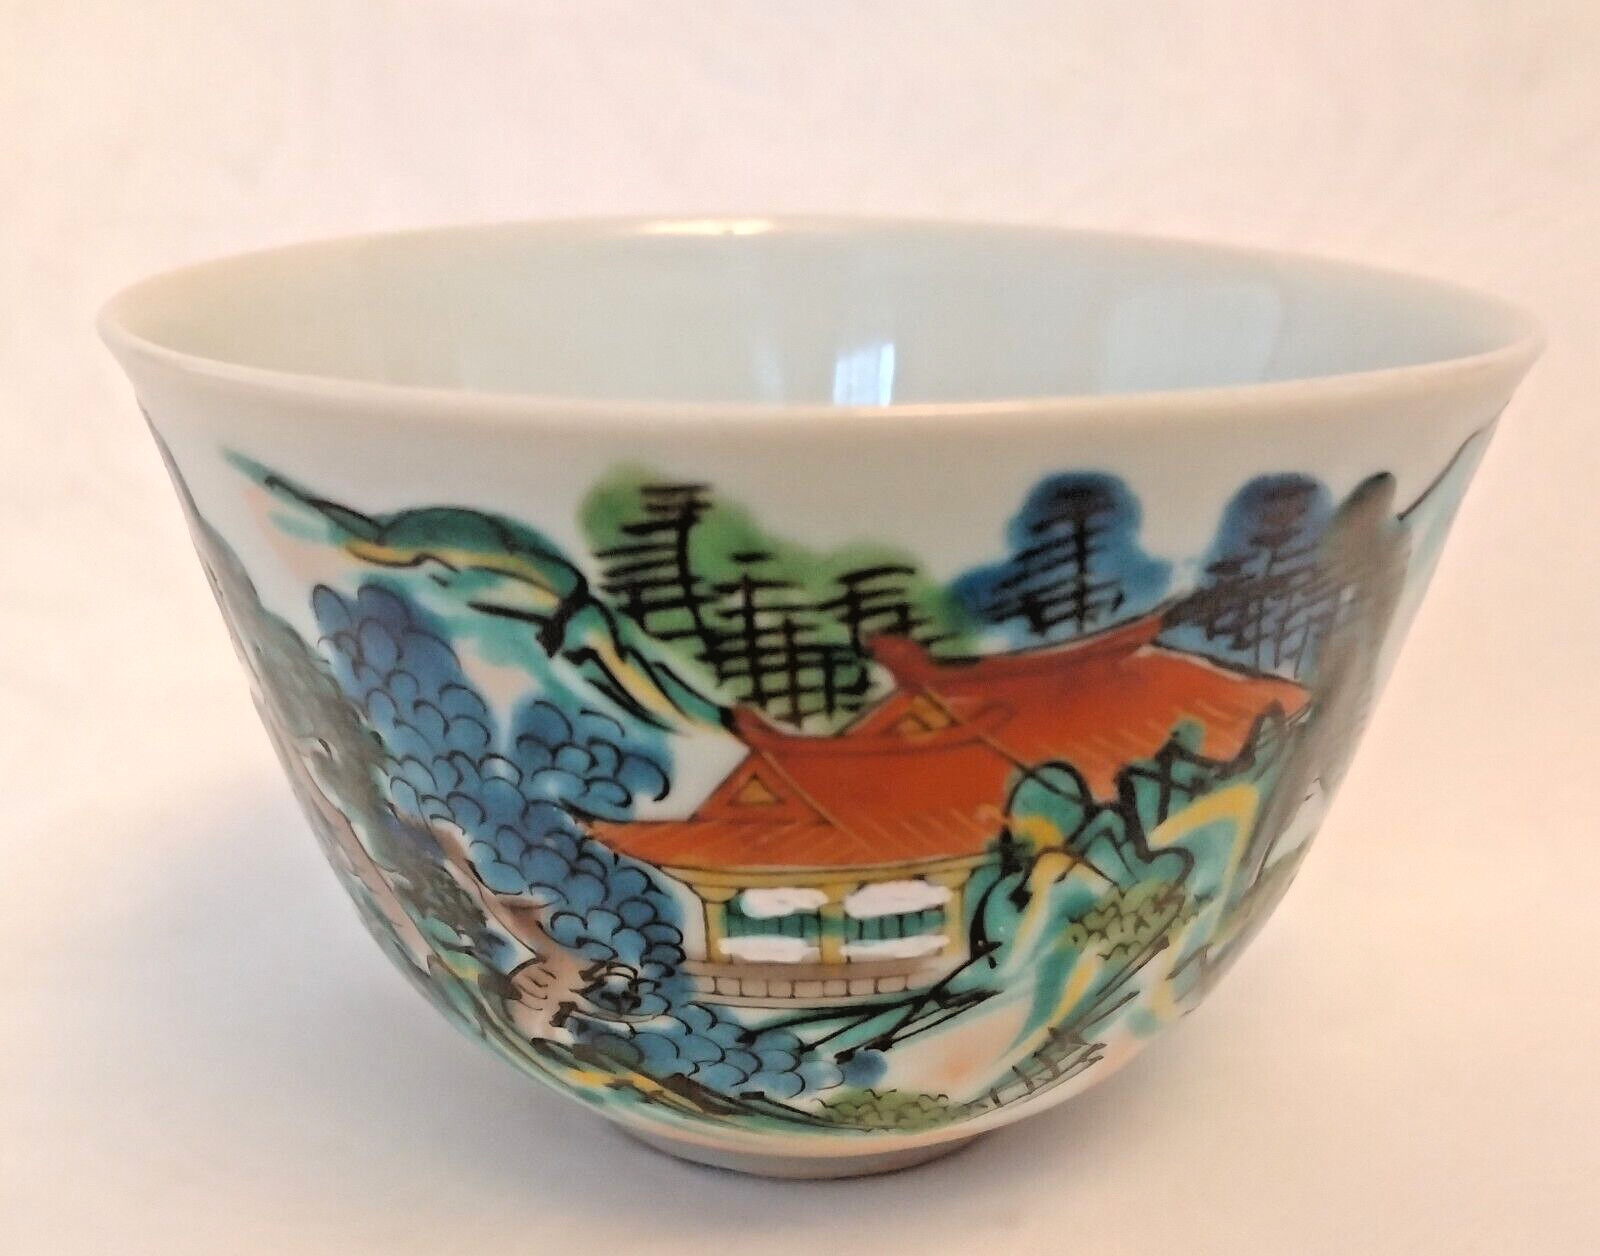 Kutani ware teacup from the early Showa era, valuable landscape painting